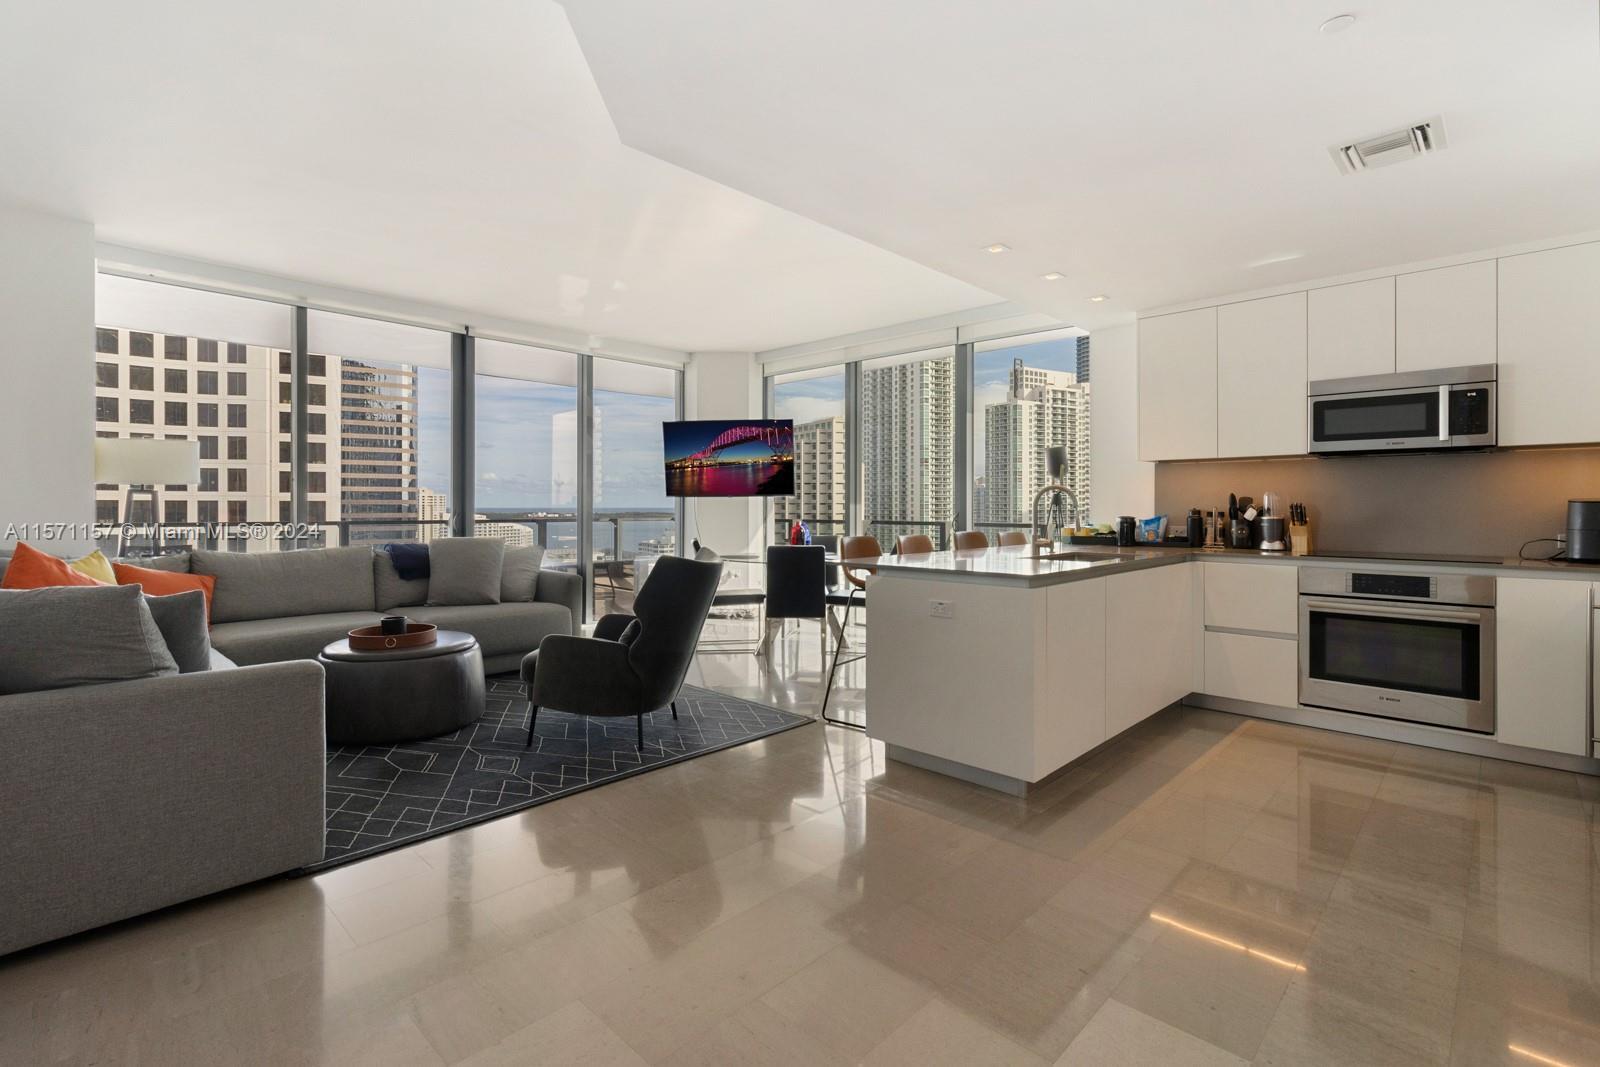 Most desirable 2 bed / 2.5 bath South-East corner unit at Reach in Brickell City Centre. It offers a